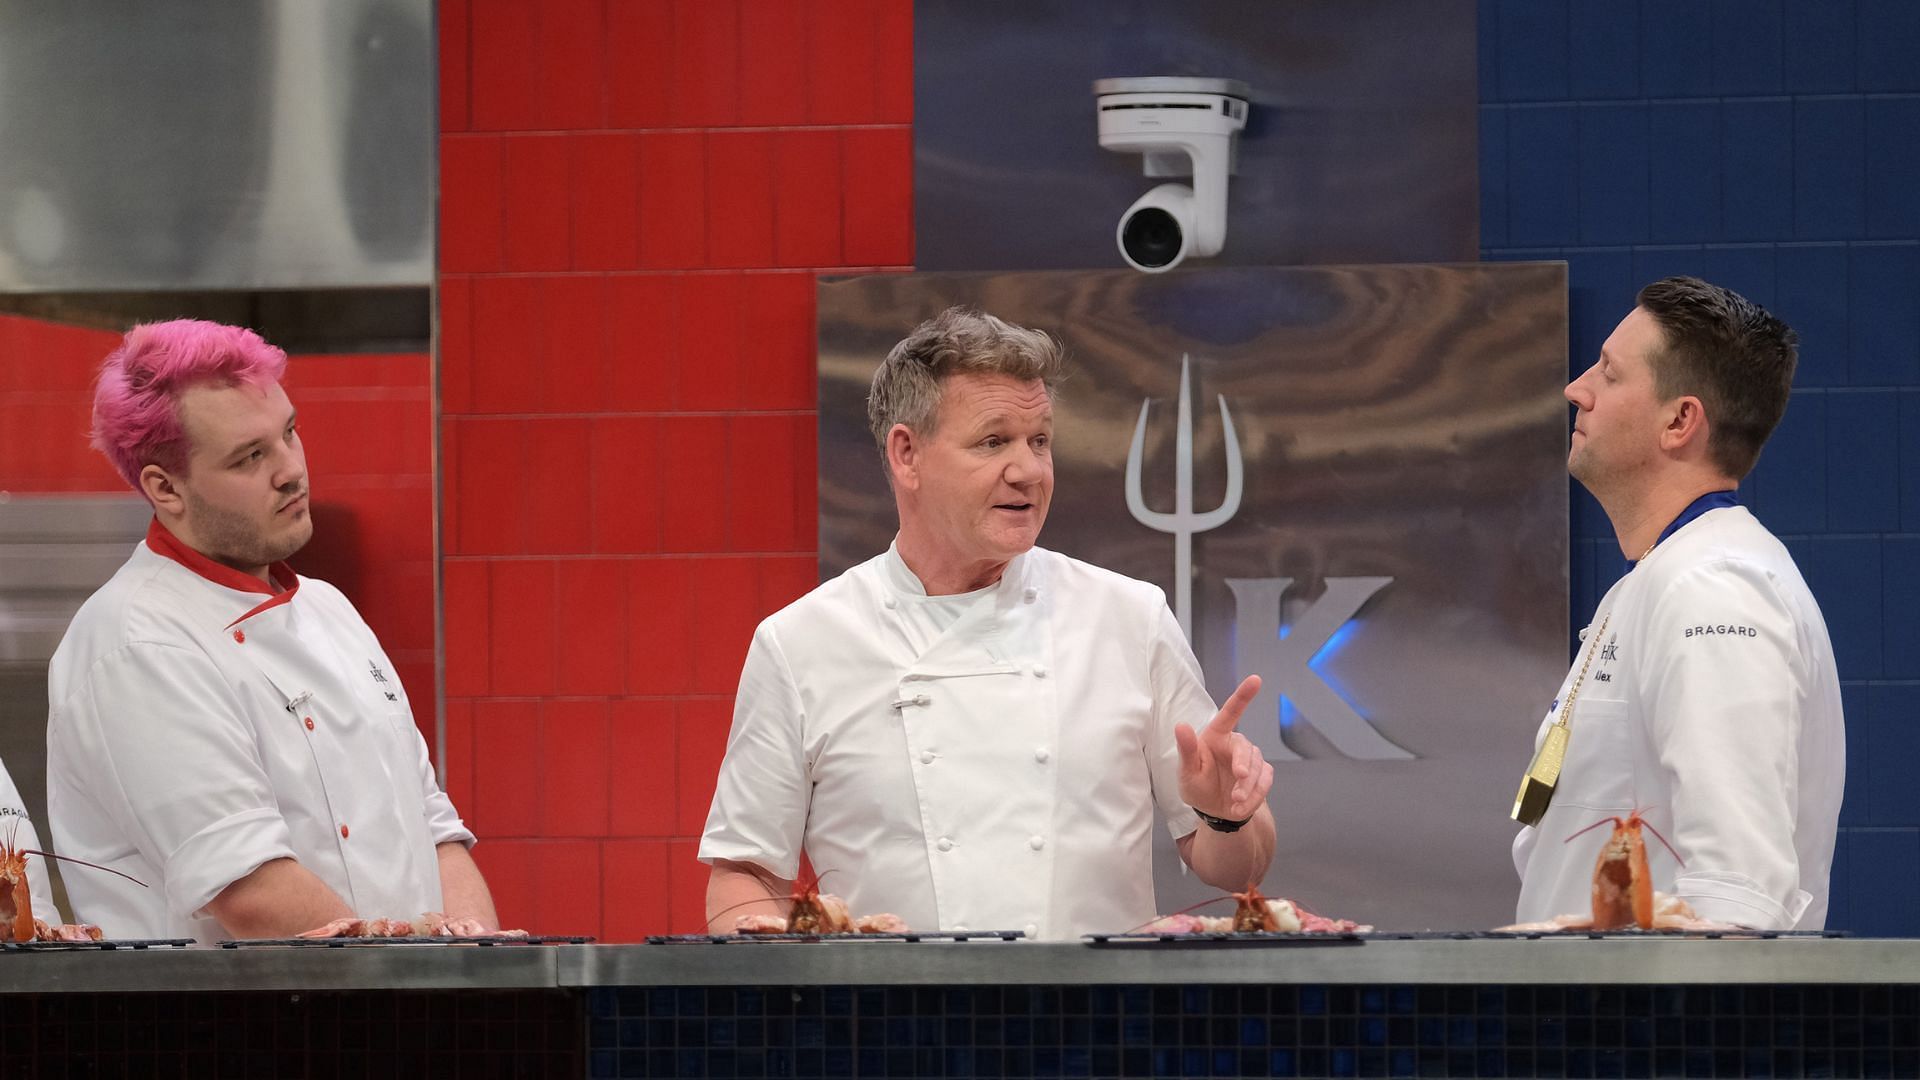 Chef Alex Belew talks about working with Gordon Ramsay on Hell